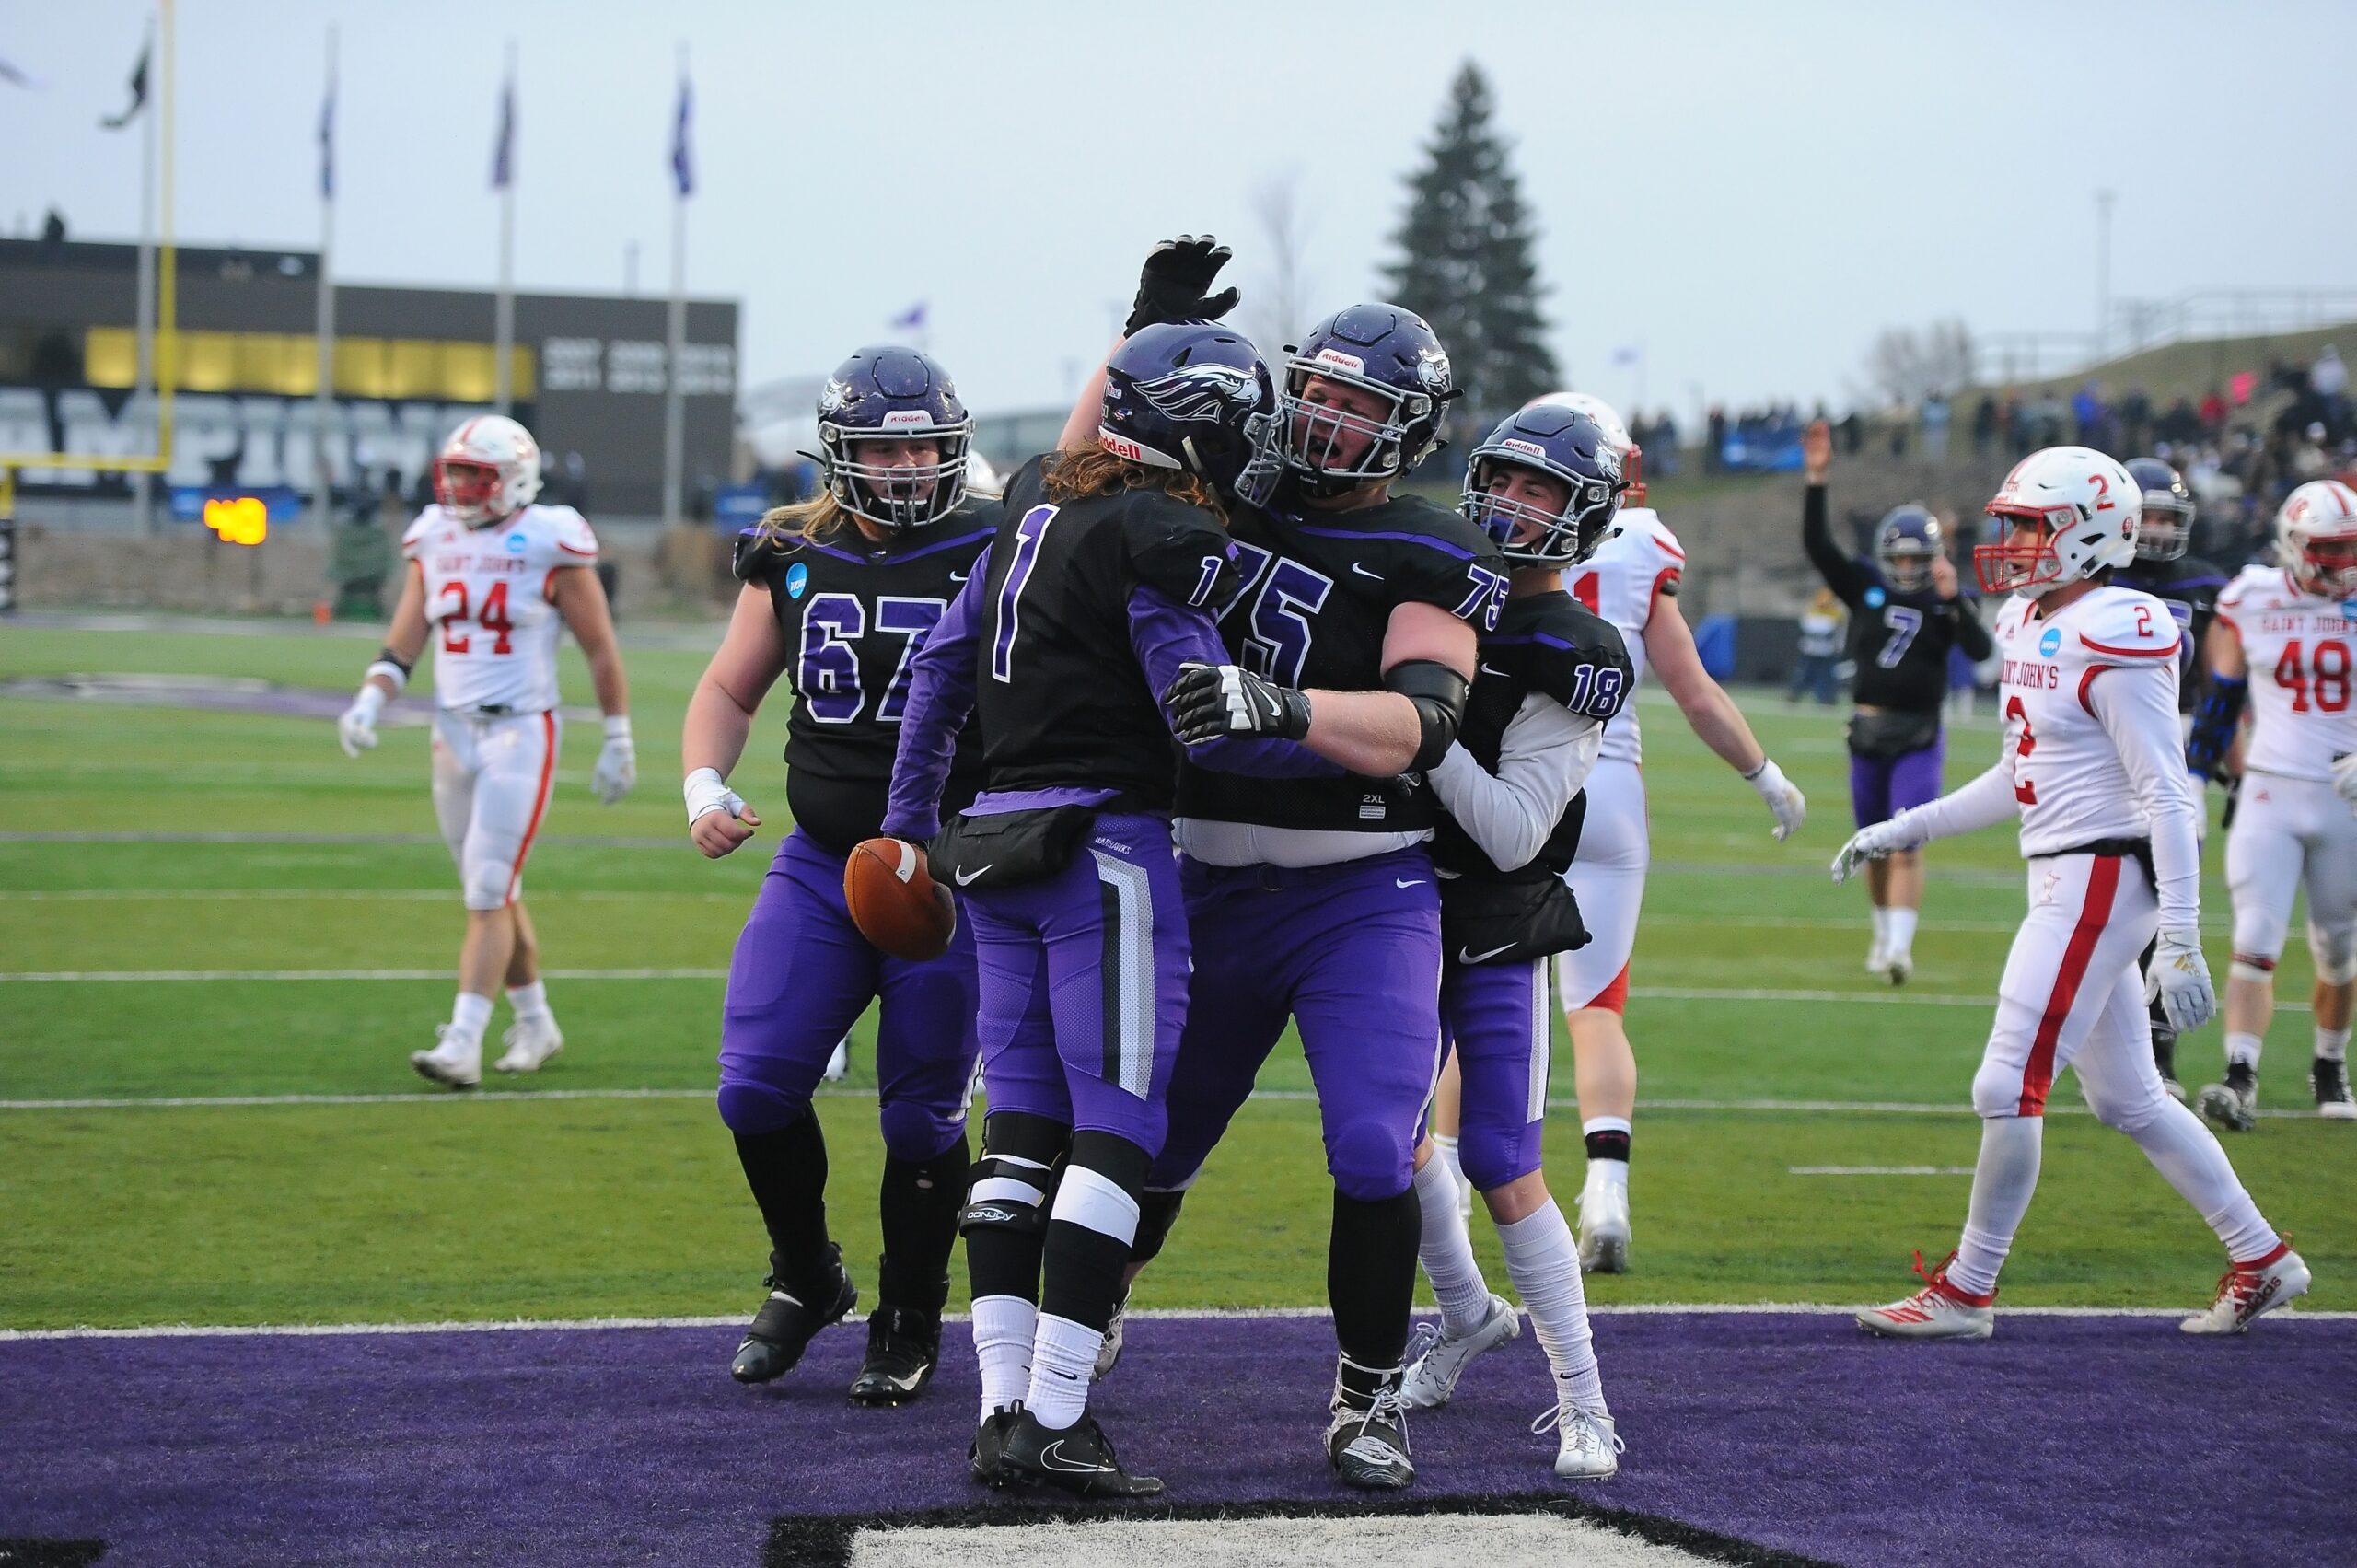 University of Wisconsin-Whitewater football players celebrate in the end zone